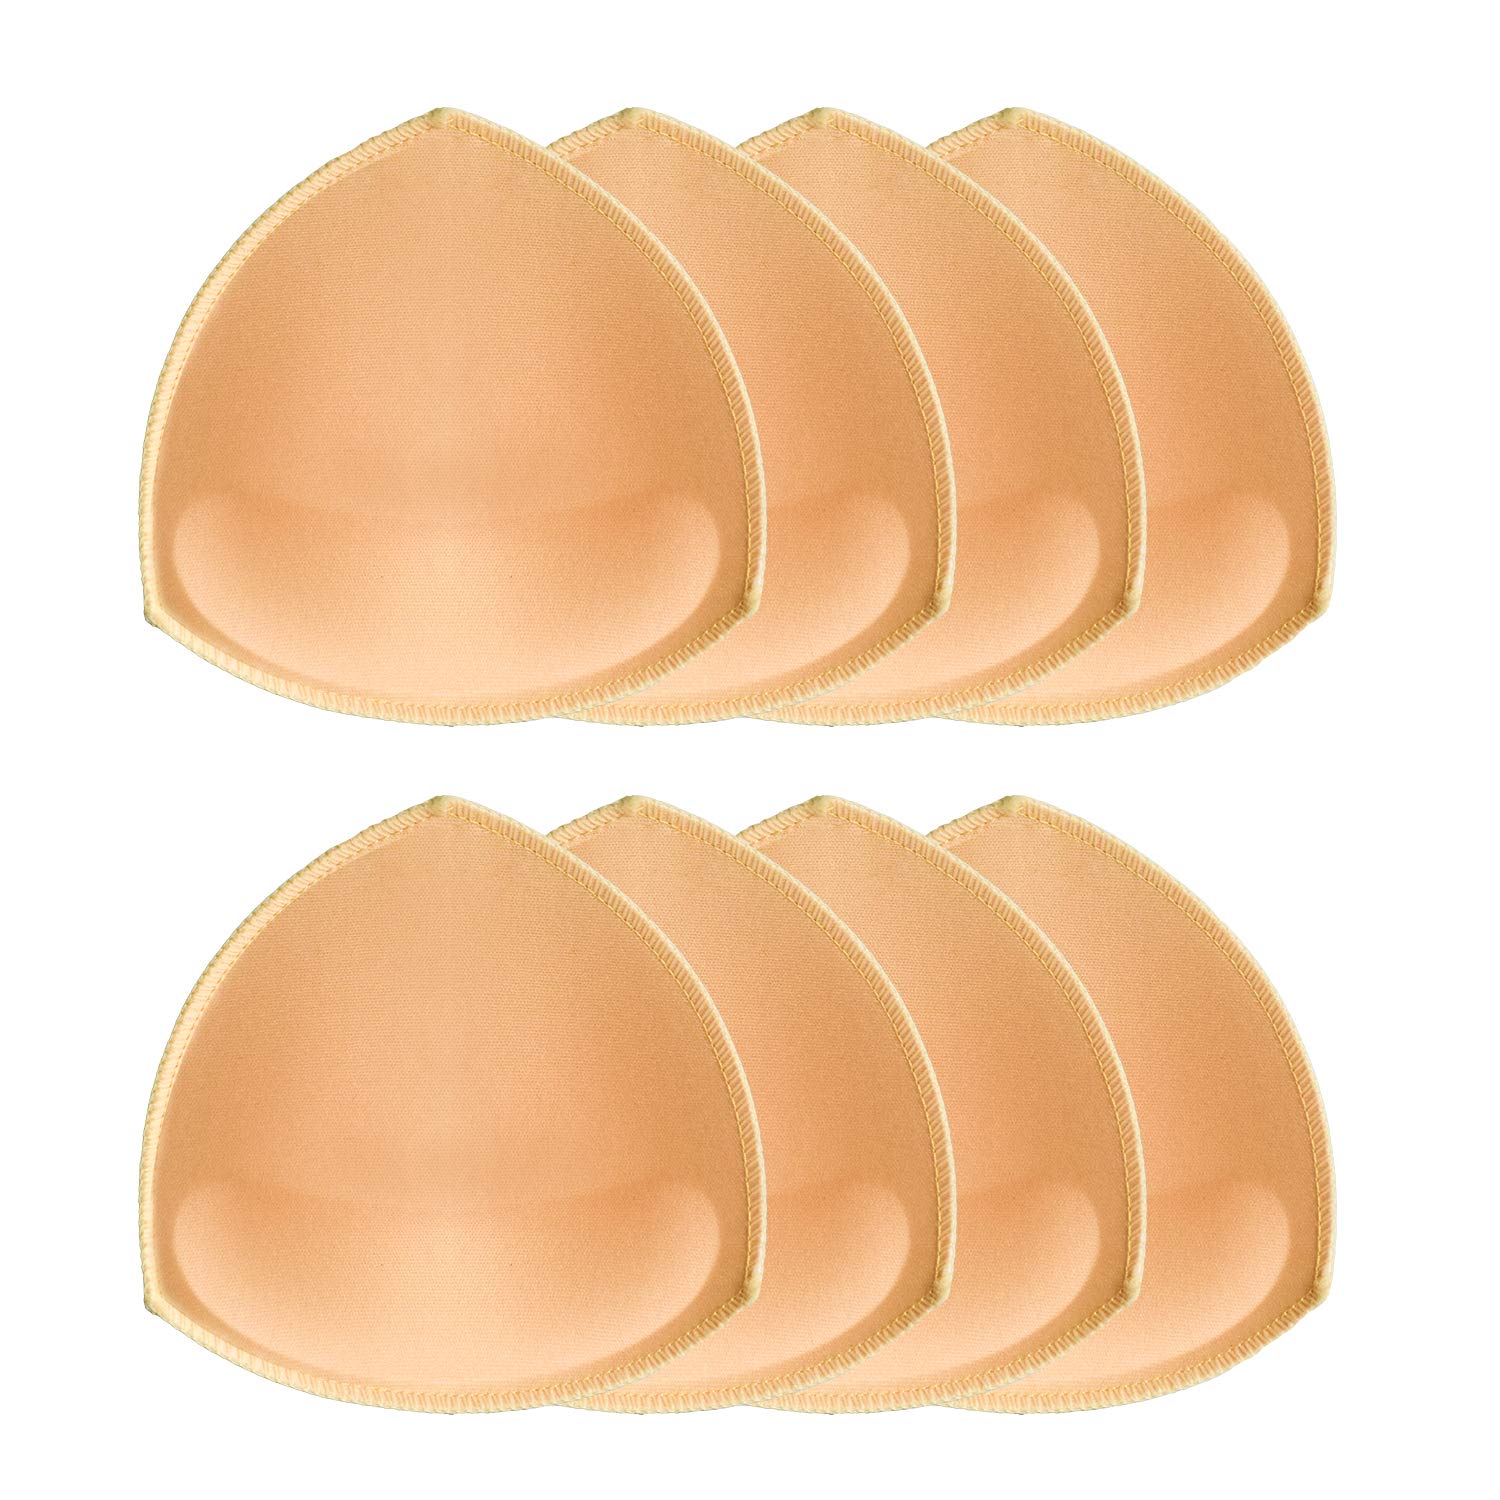 URSMART 4 pairs Bra Cups Inserts,Sports Cups Bra Inserts Push up Breathable,Removable for woman (Beige) …